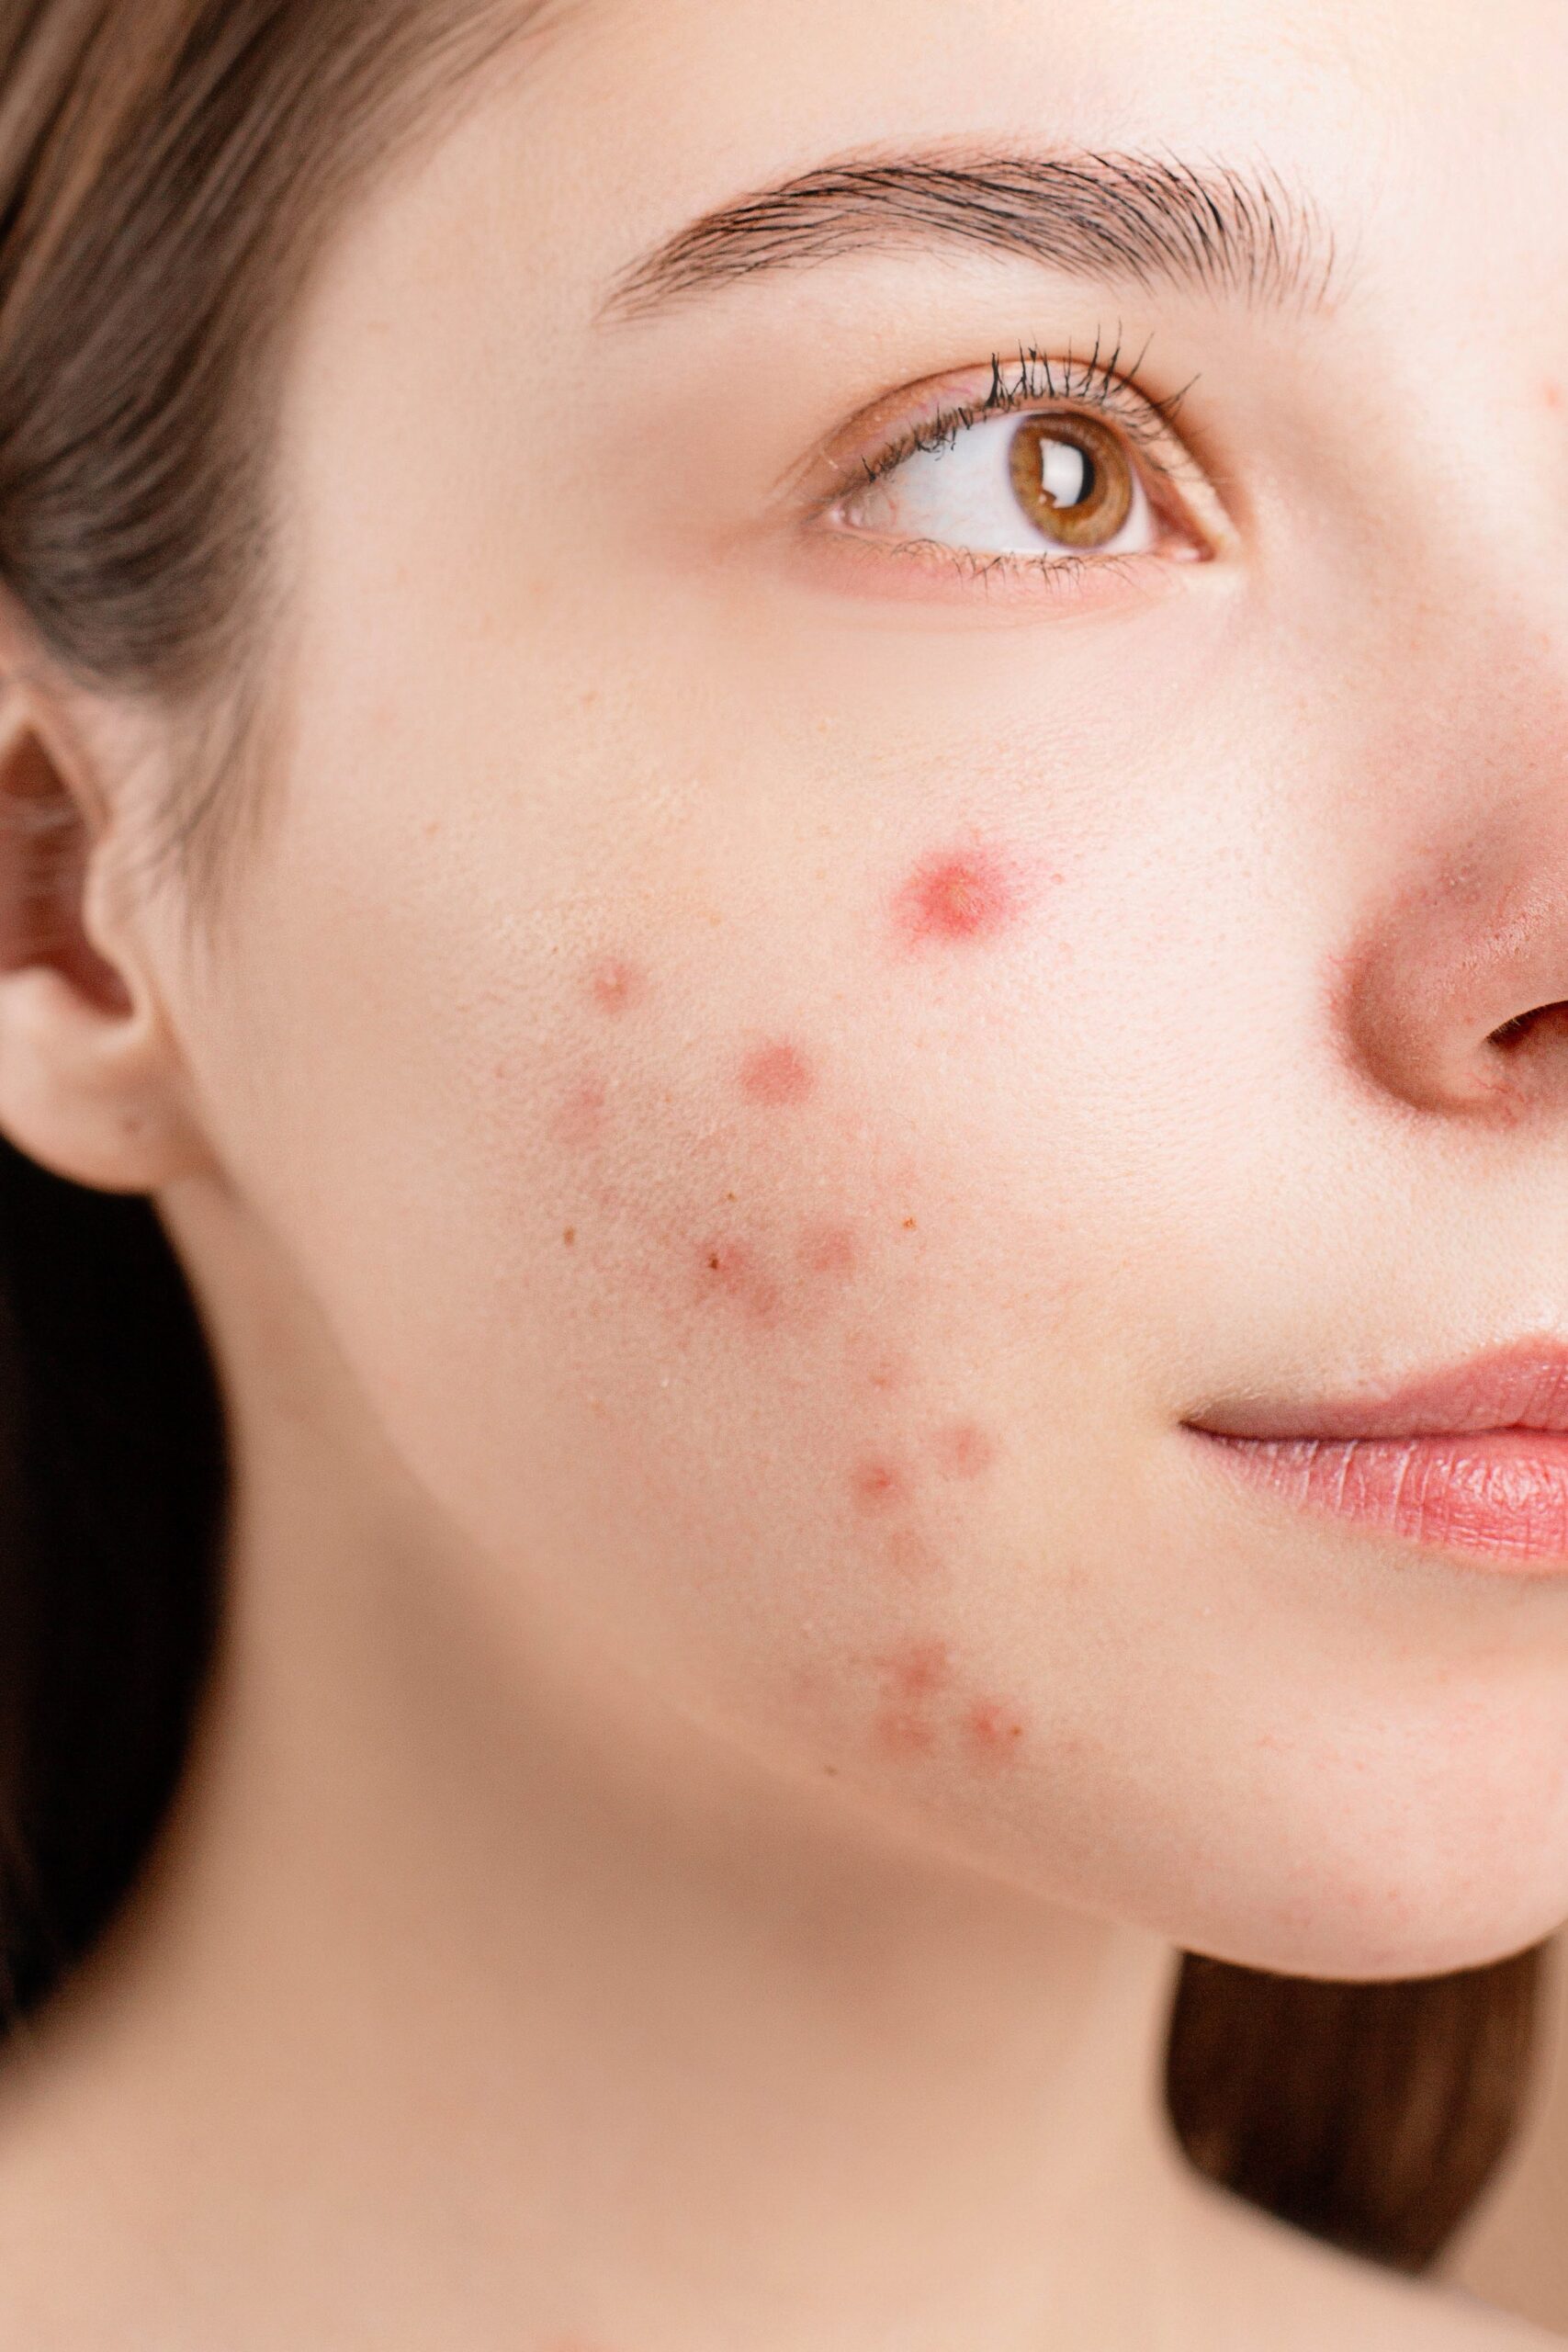 What is an Acne?